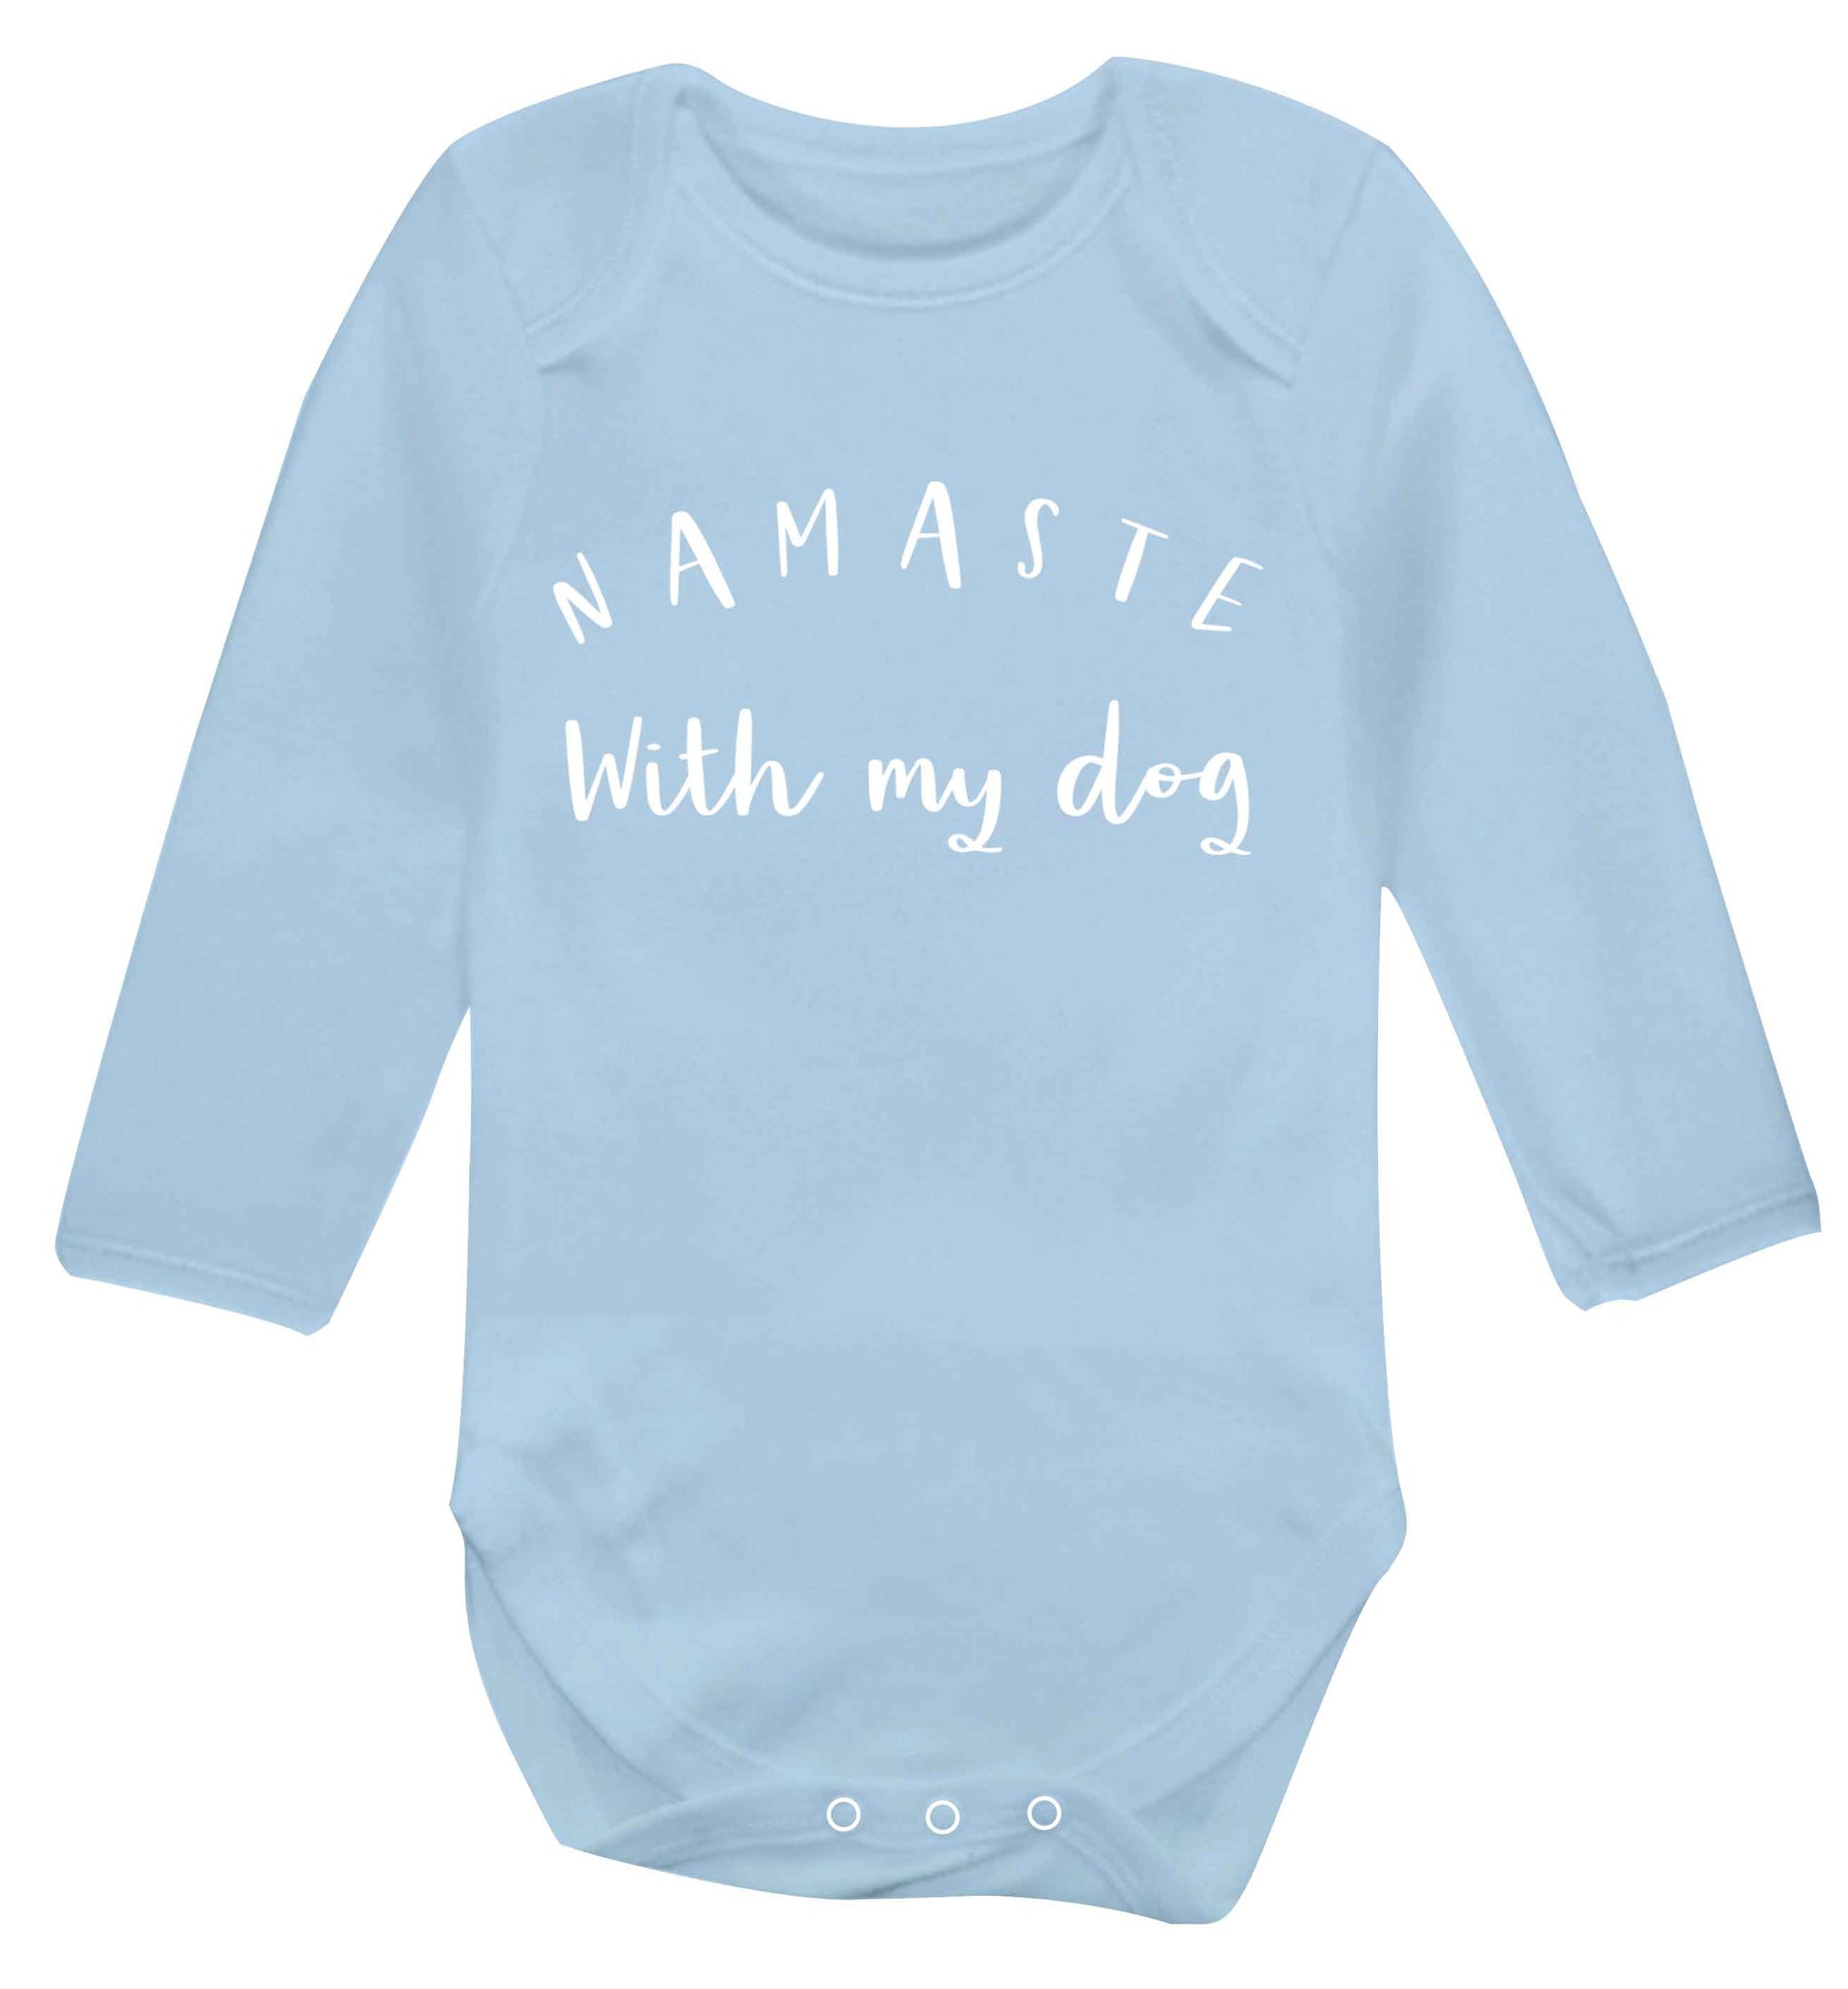 Namaste with my dog Baby Vest long sleeved pale blue 6-12 months